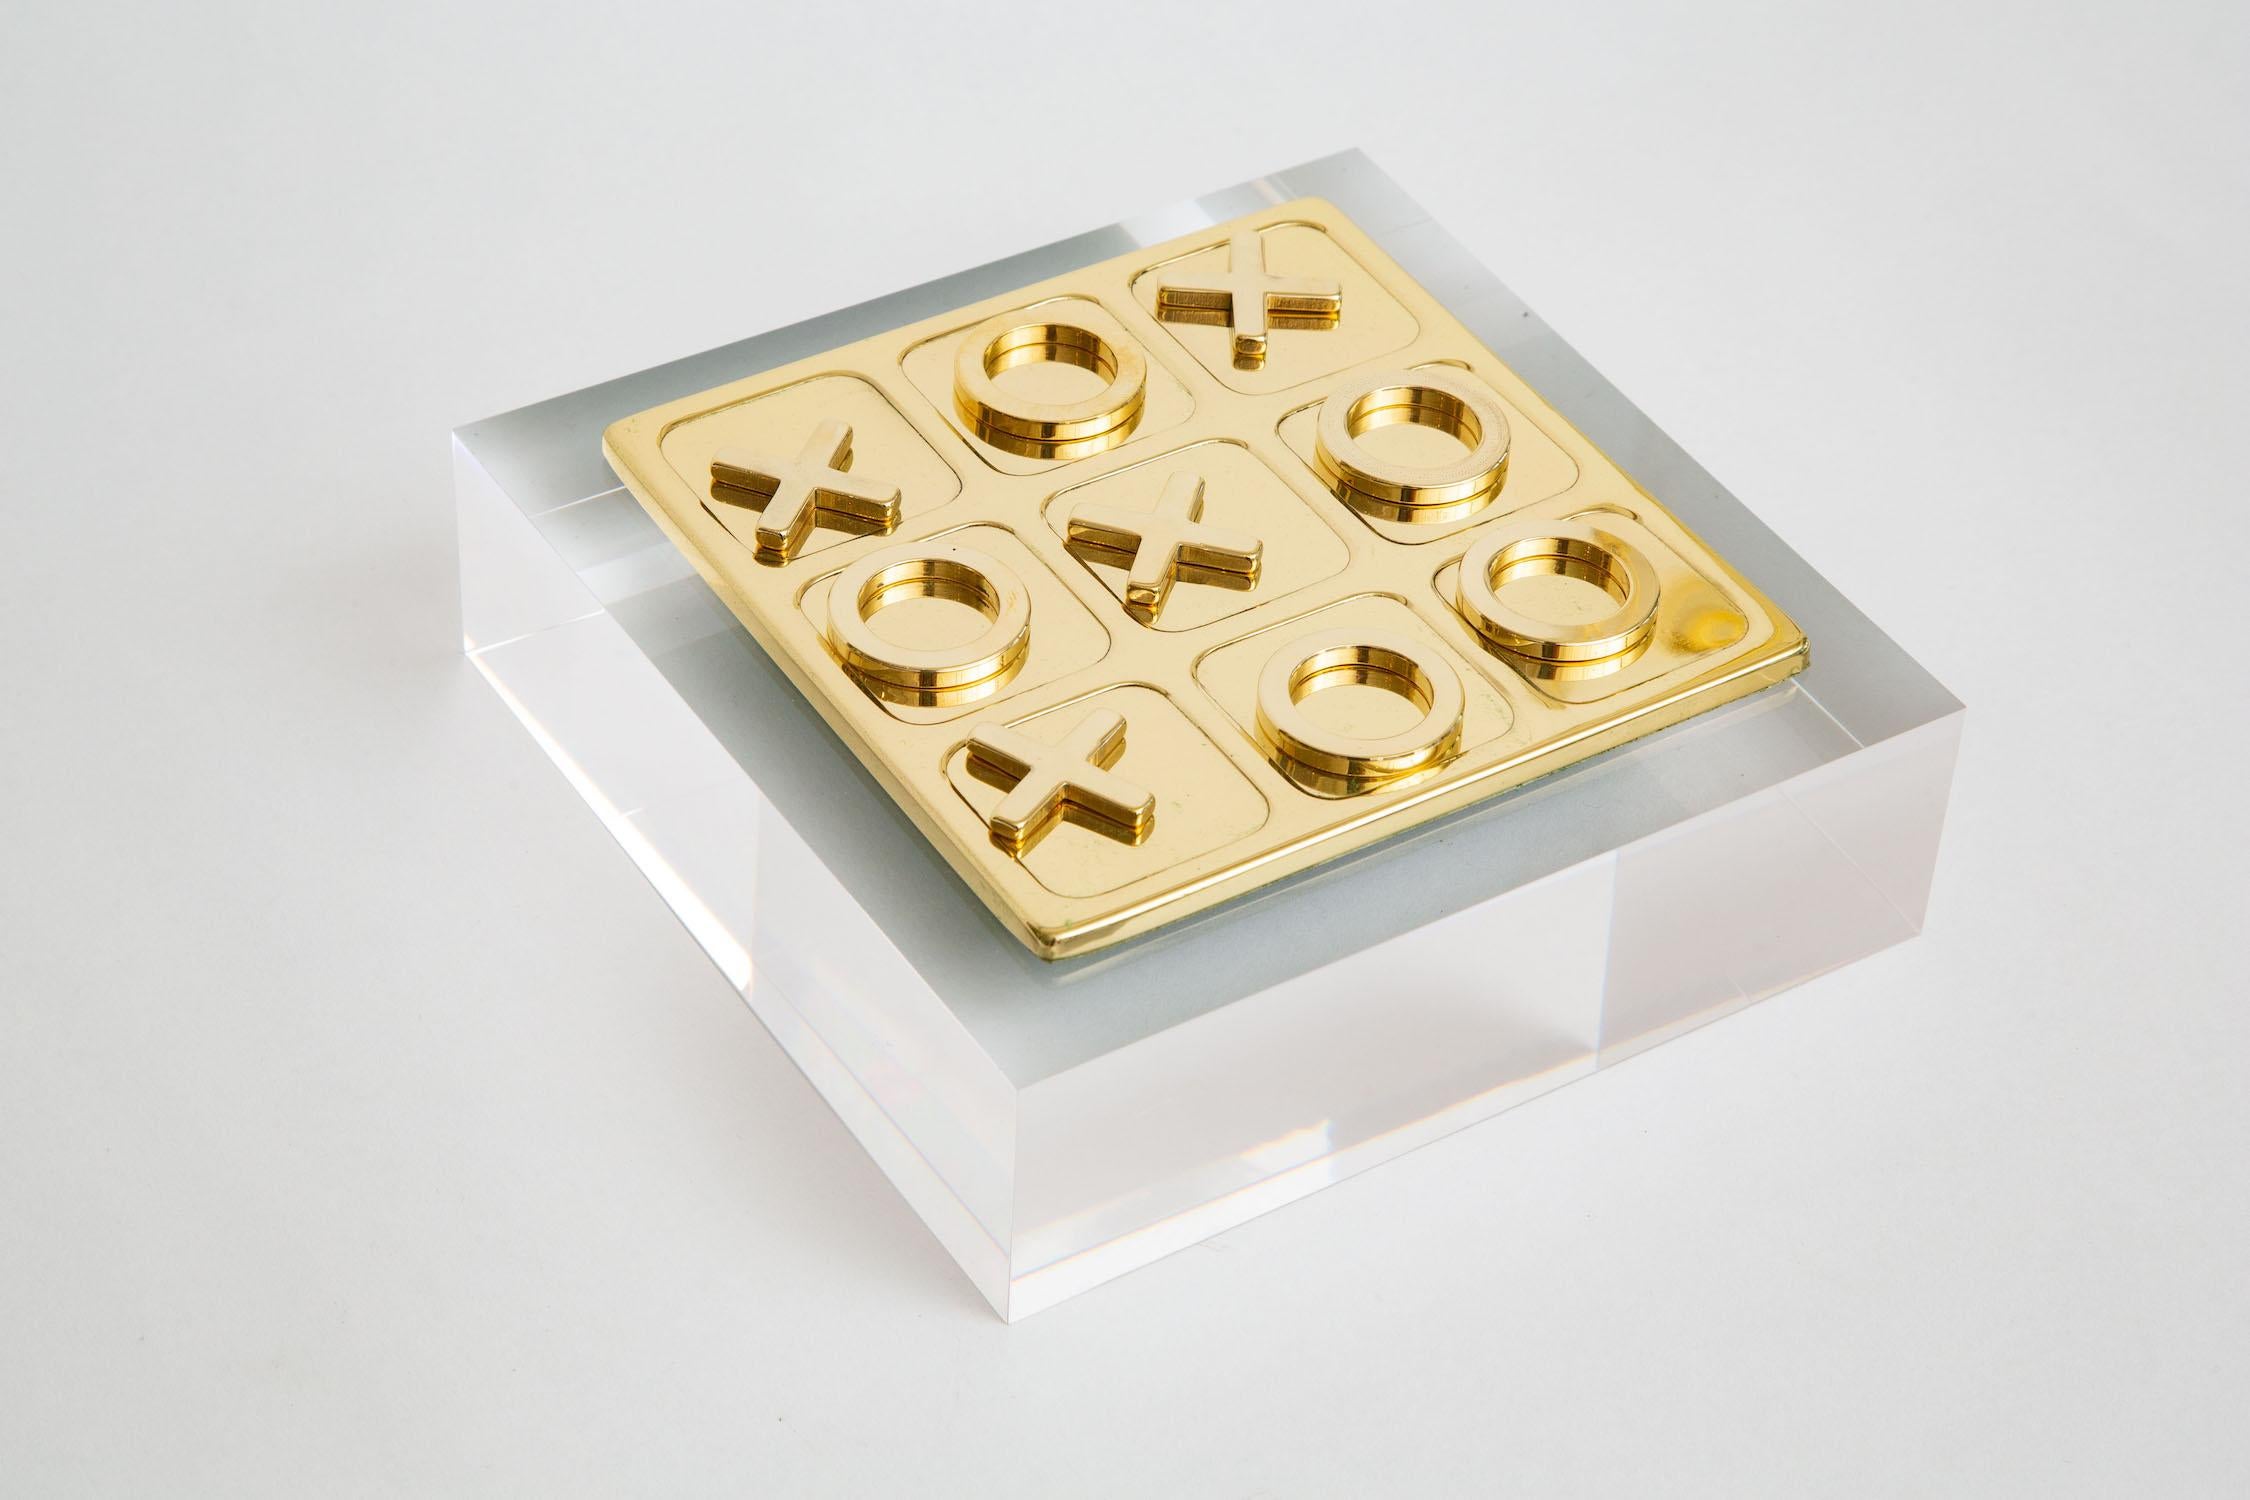 This polished brass Mid-Century Modern vintage tac tac toe square game set has 10 players total of X's and 0